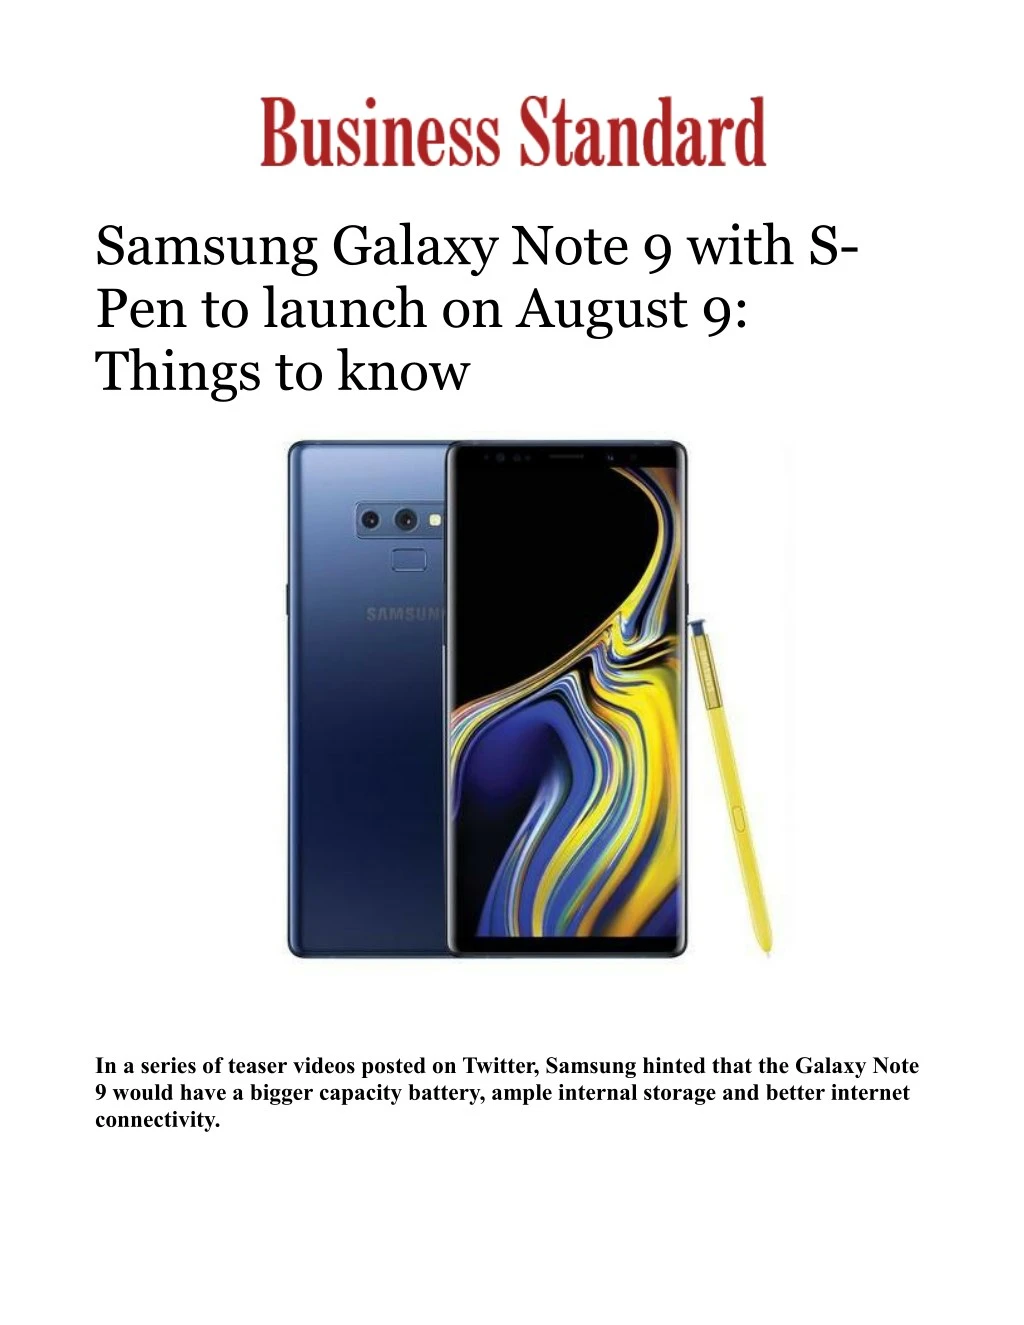 samsung galaxy note 9 with s pen to launch